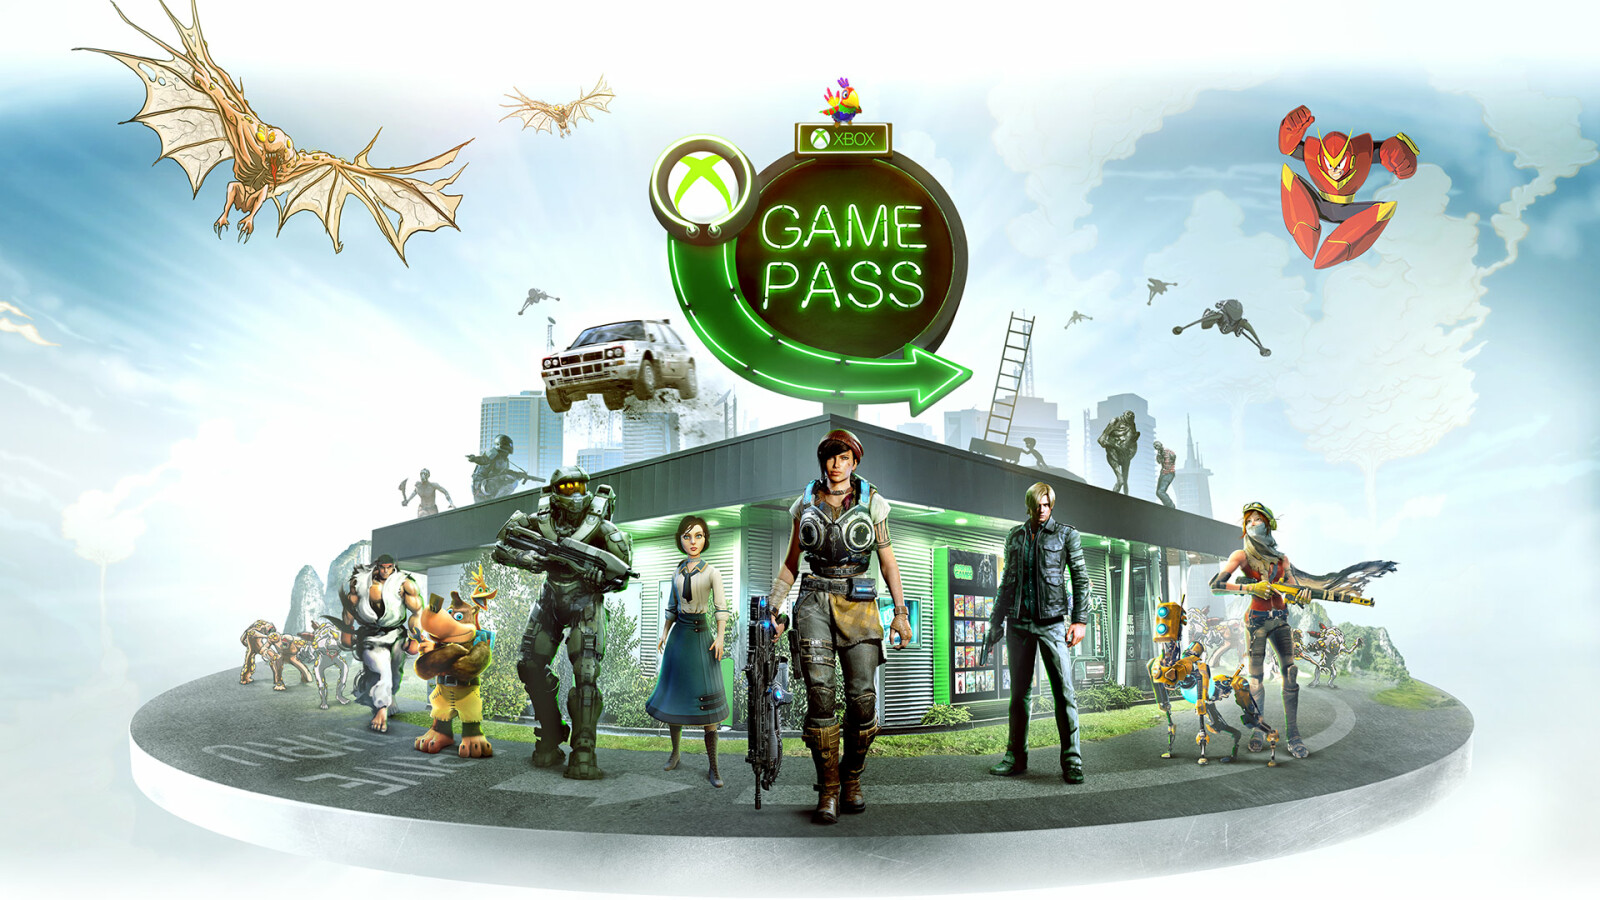 Xbox Game Pass: Microsoft launches a family subscription

